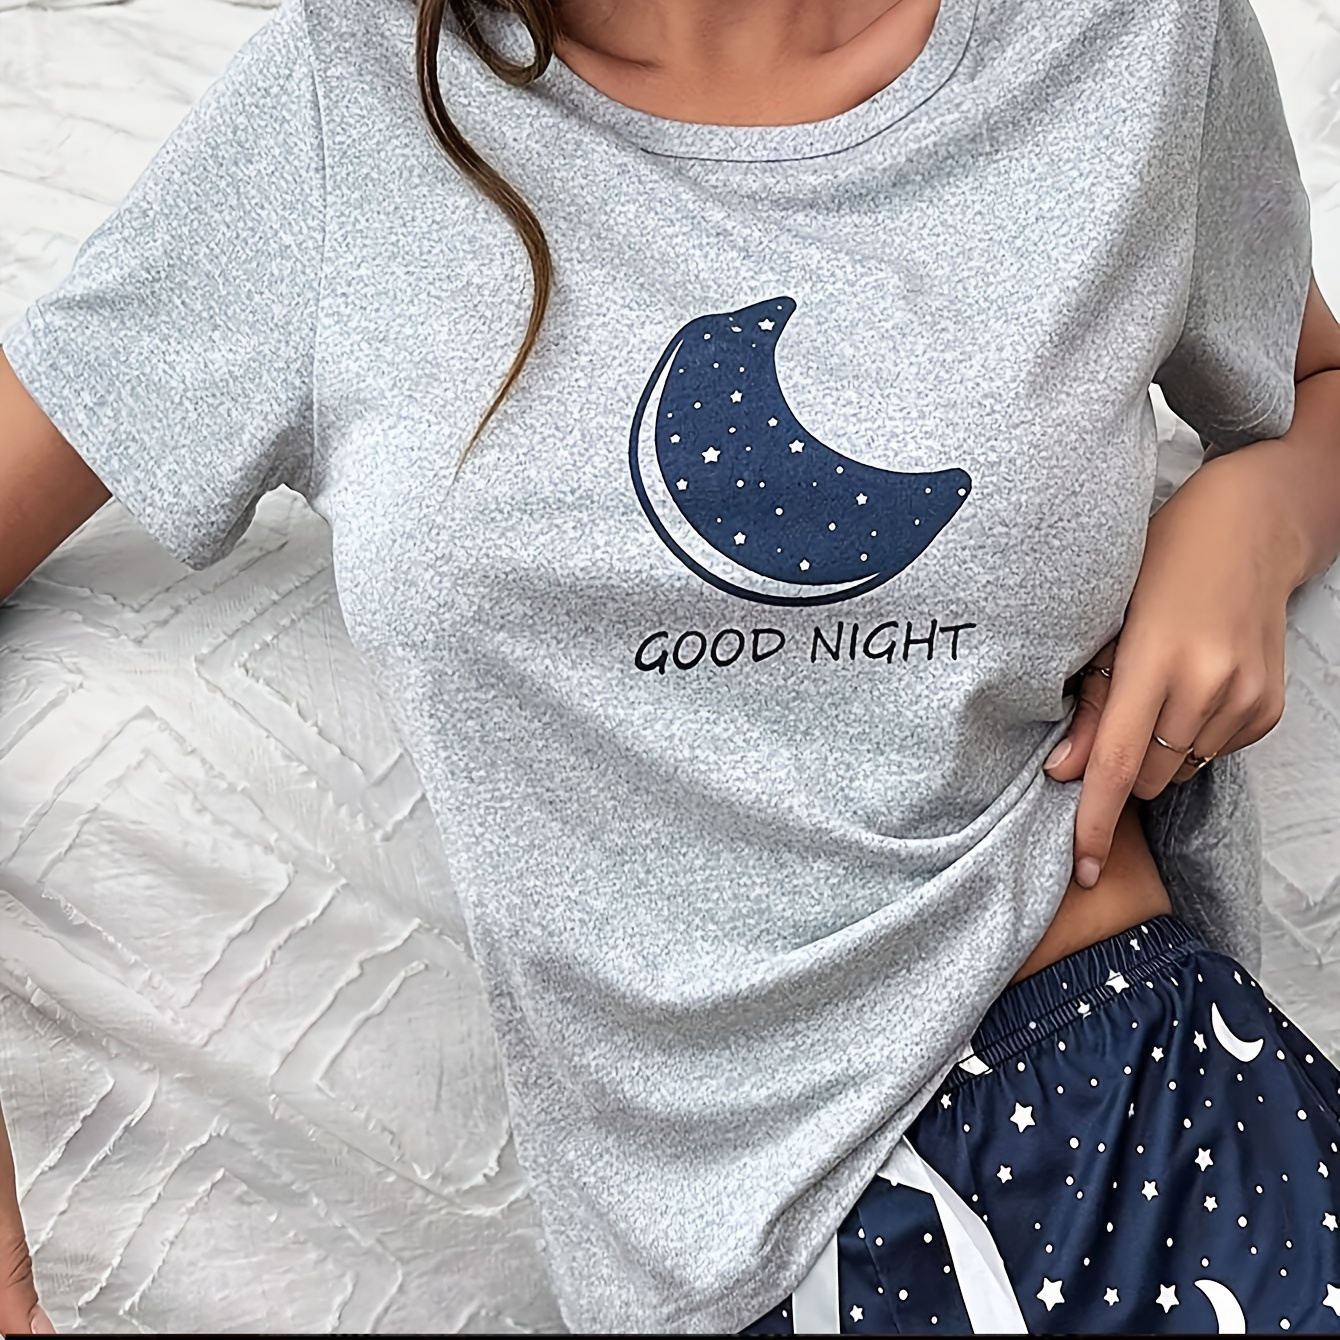 

Women's Moon & Star & Slogan Print Casual Pajama Tops, Short Sleeve Round Neck T-shirt, Comfortable Relaxed Fit